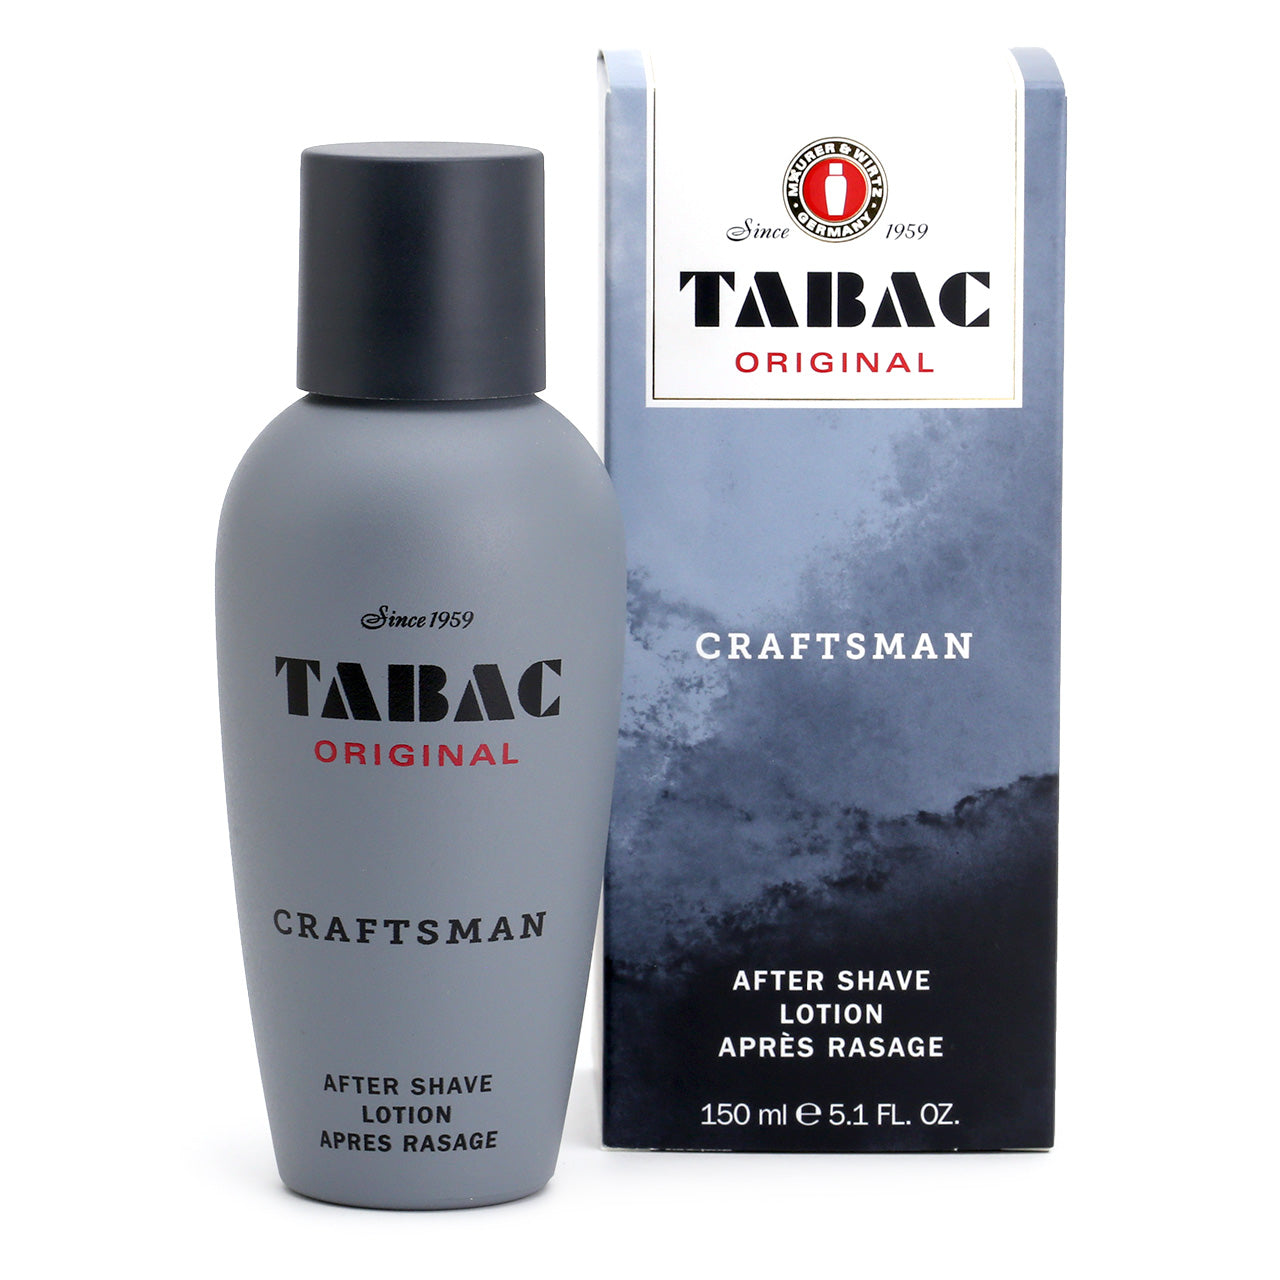 Tabac Original Craftsman Aftershave Lotion 150ml is packed in a heavy stone-like bottle